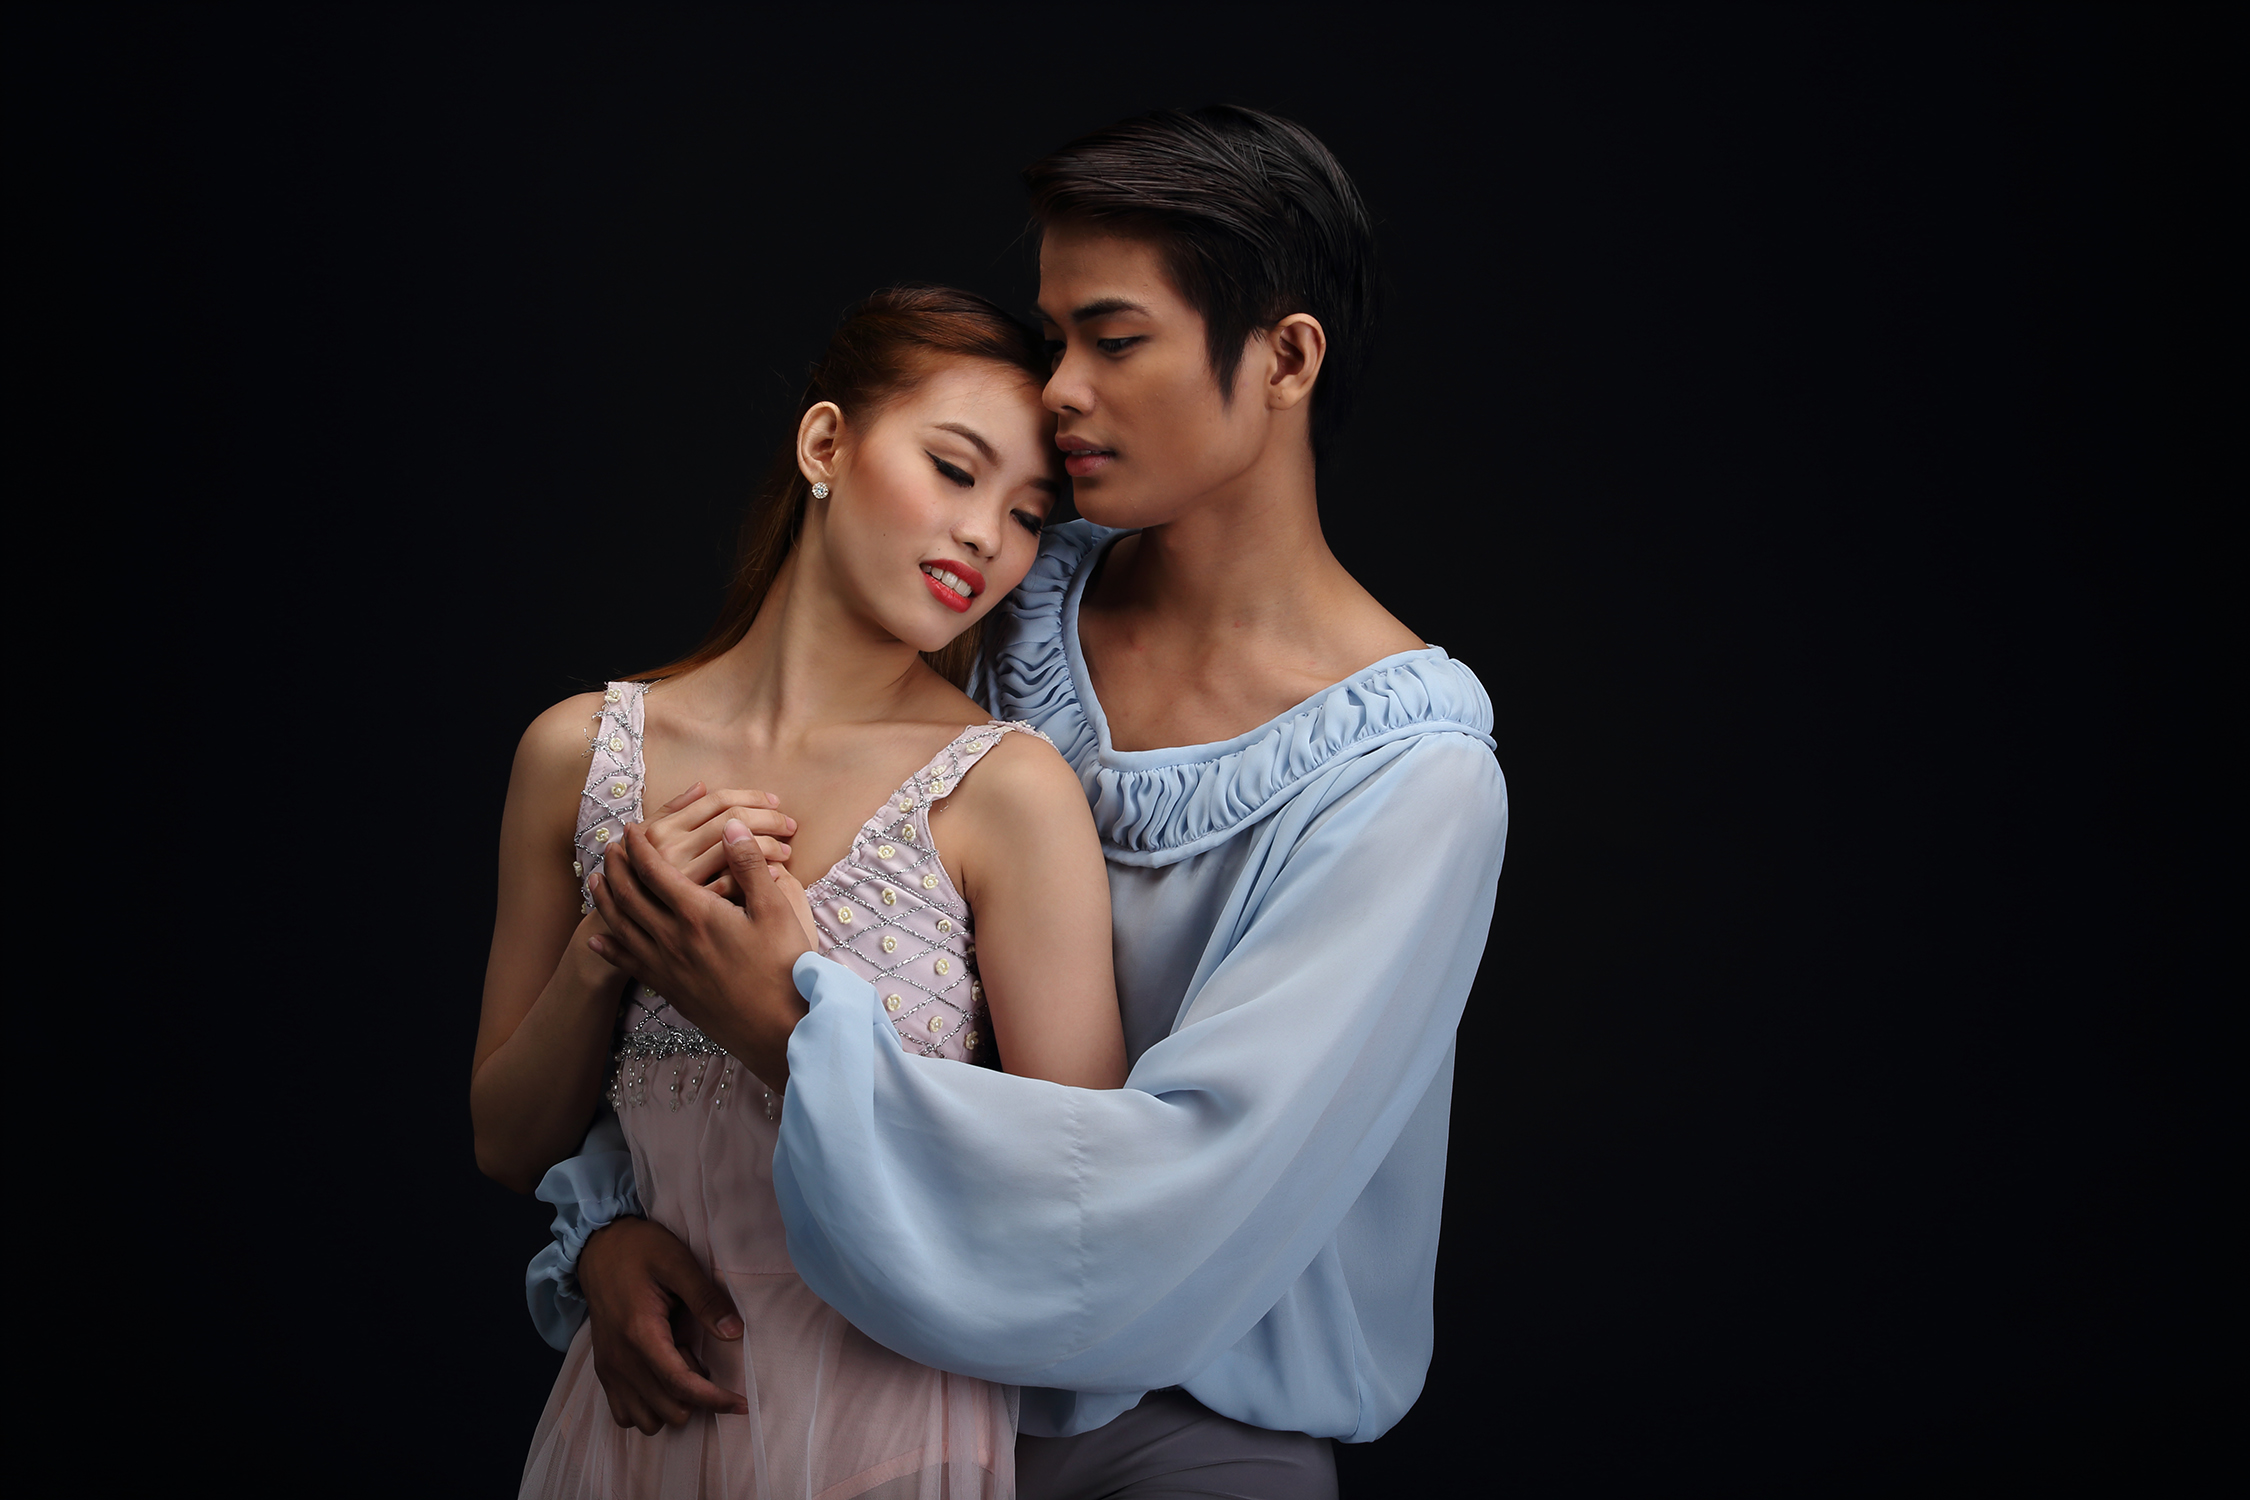 Dancing the full-length Romeo and Juliet in 2015, with Elpidio Magat as the Romeo to her Juliet, was a dream come true for Joan.